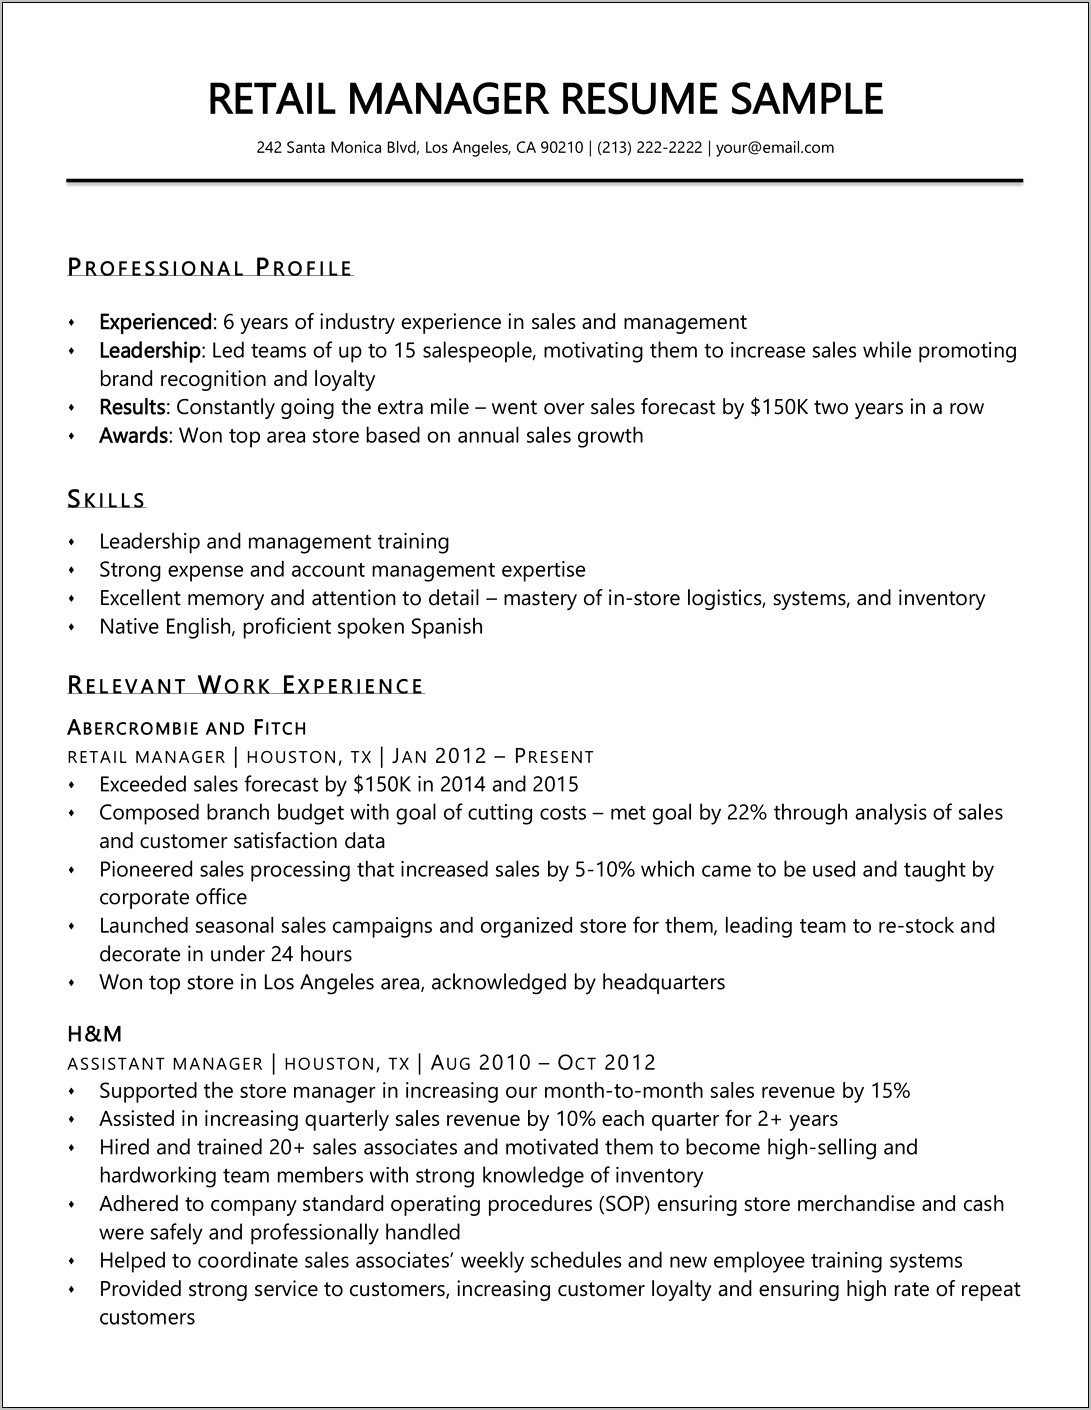 Resume Objective For Retail Jobs